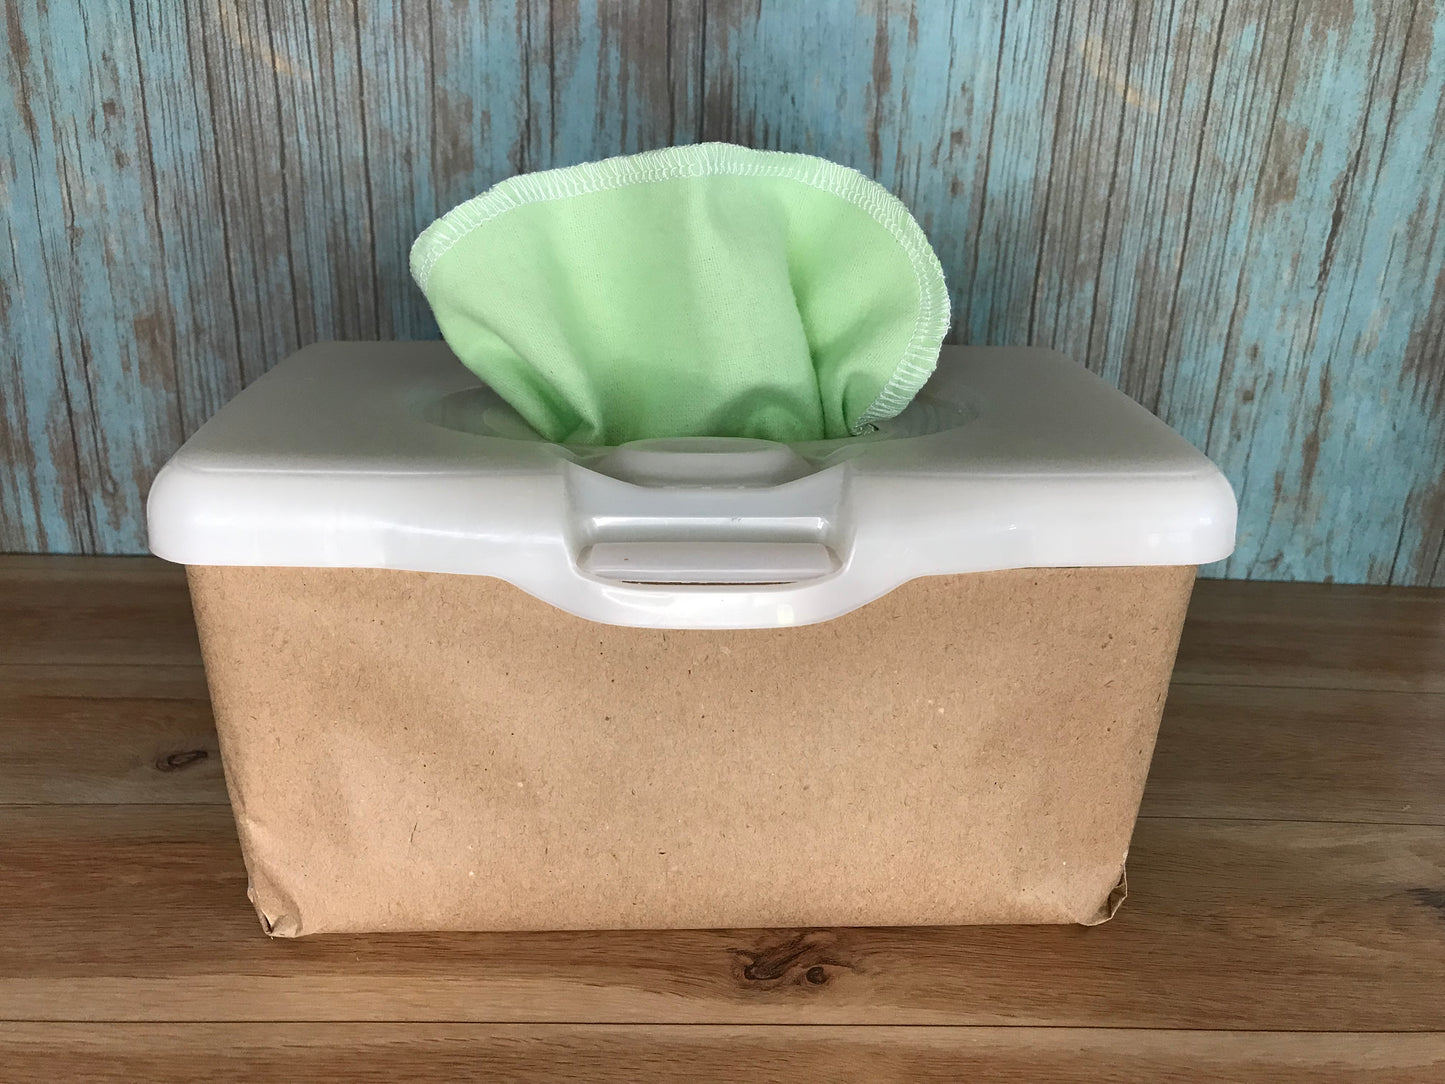 Cloth wipes 1 layer of 100% Cotton - reusable baby wipes